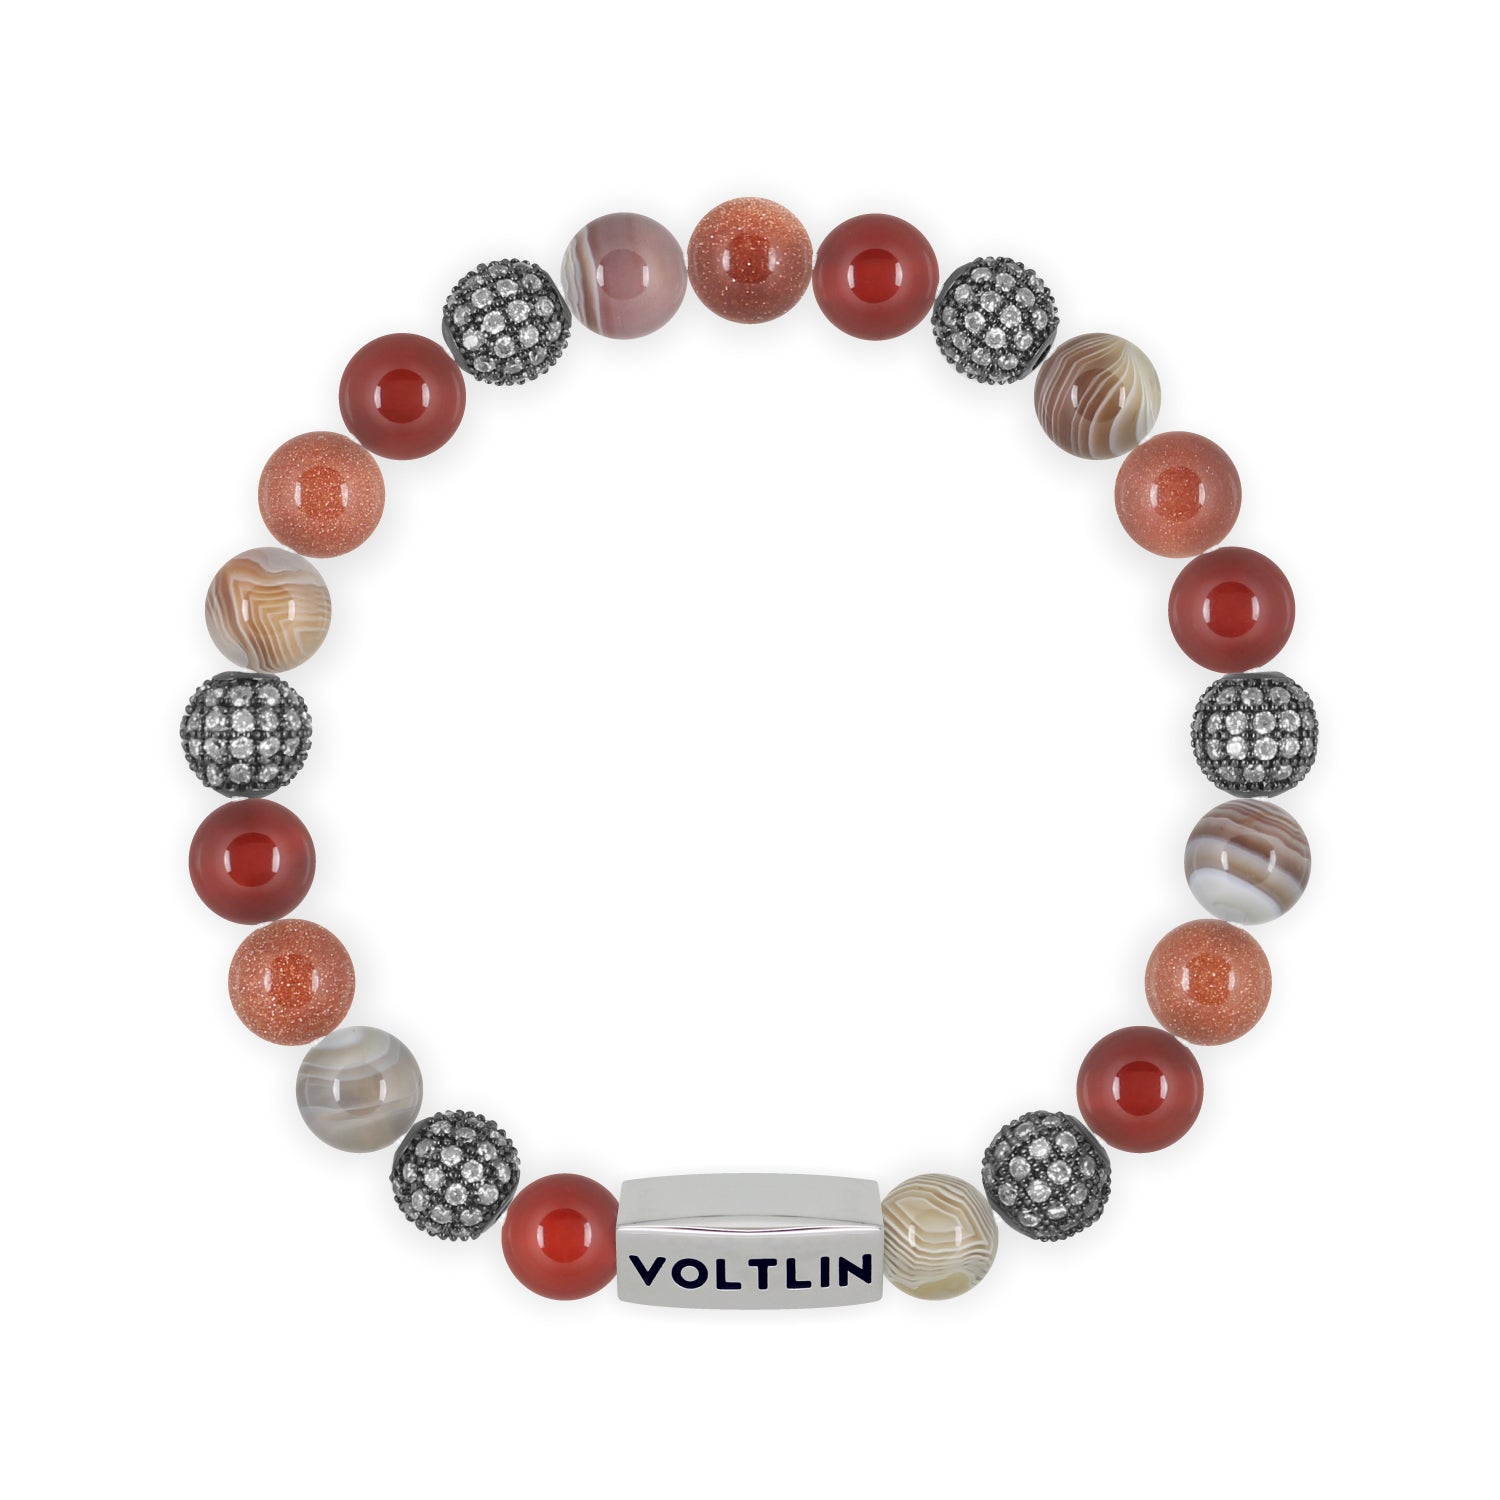 Front view of an 8mm Sienna Sirius beaded stretch bracelet featuring Carnelian, Steel Pave, Smooth Botswana Agate, & Red Goldstone crystal and silver stainless steel logo bead made by Voltlin